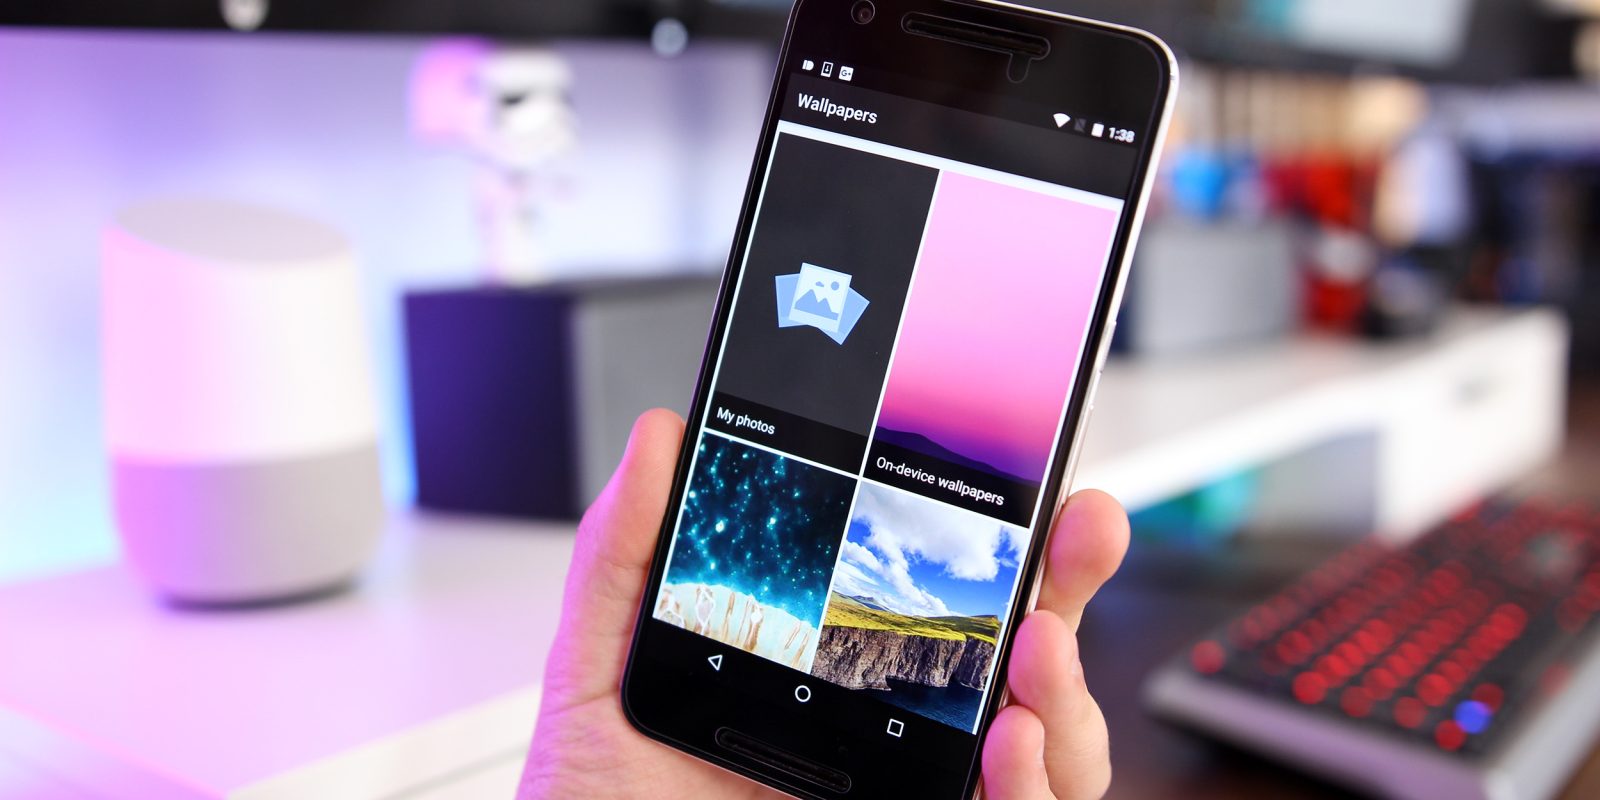 Google has added more wallpapers to the